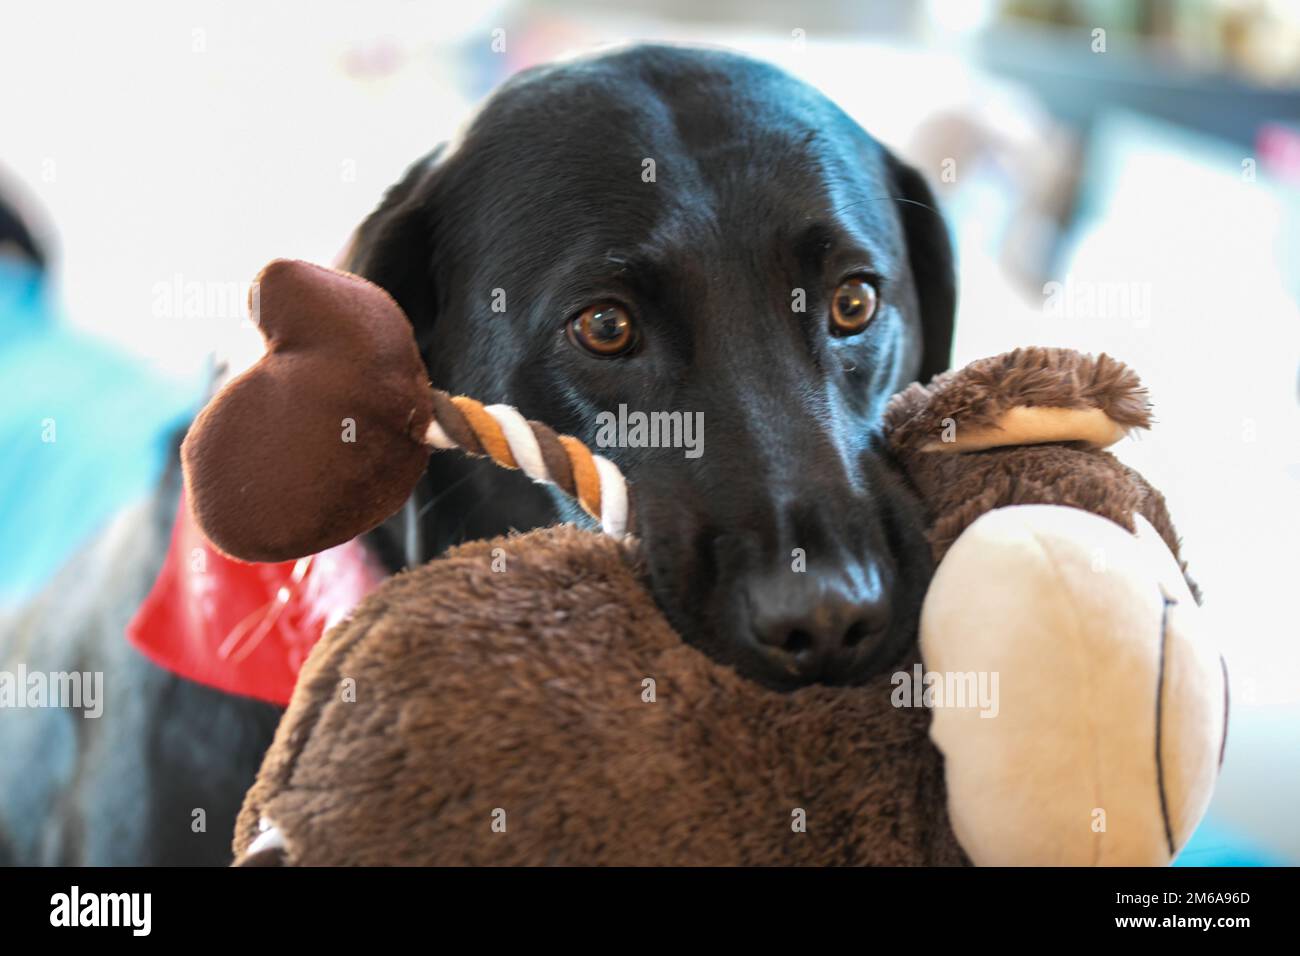 Adorable black Labrador holding a stuffed animal in its mouth Stock Photo